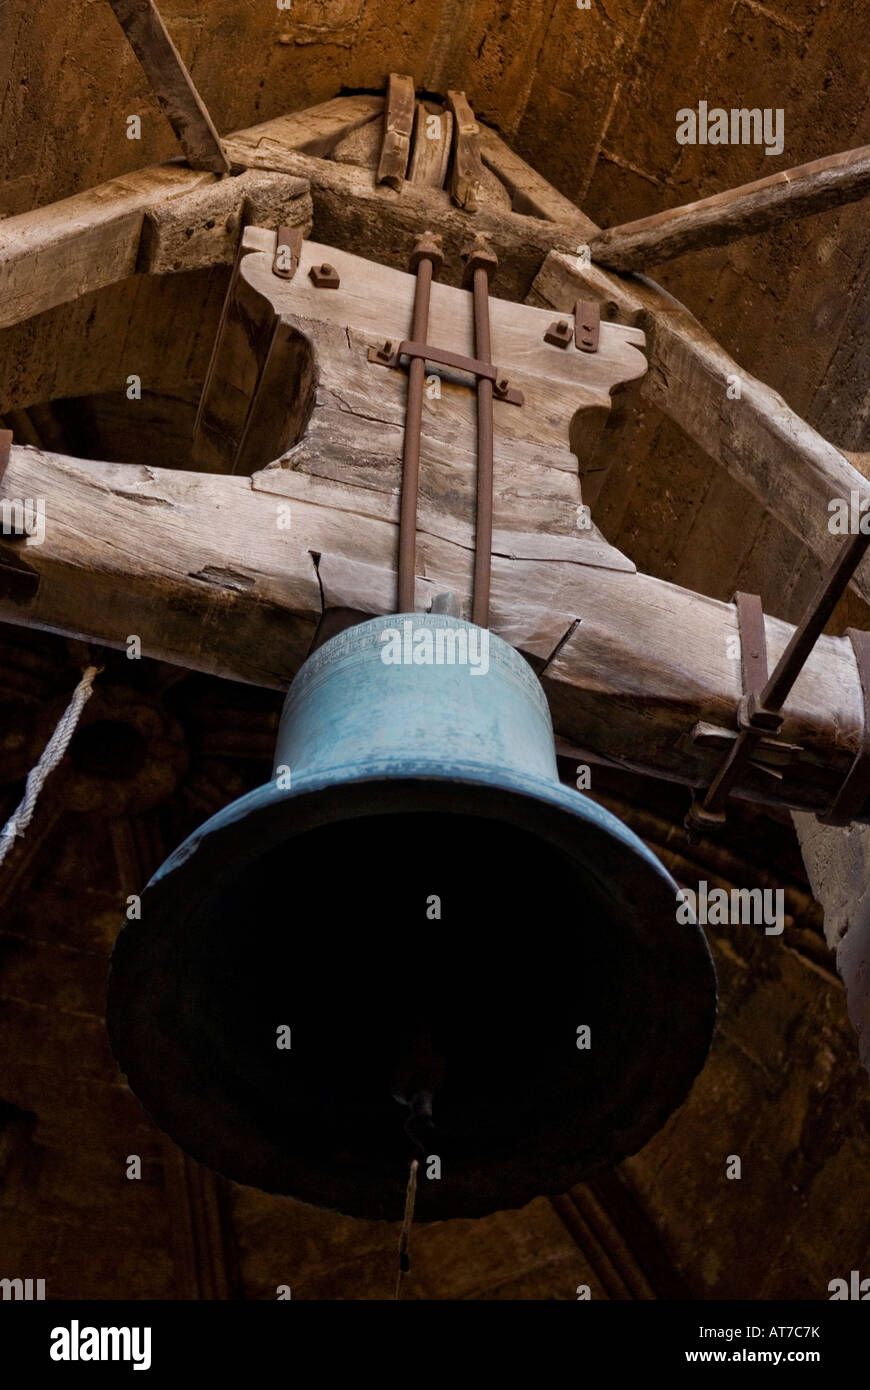 Catalina, the oldest bell in the bell-tower of the cathedral of Valencia, Spain Stock Photo